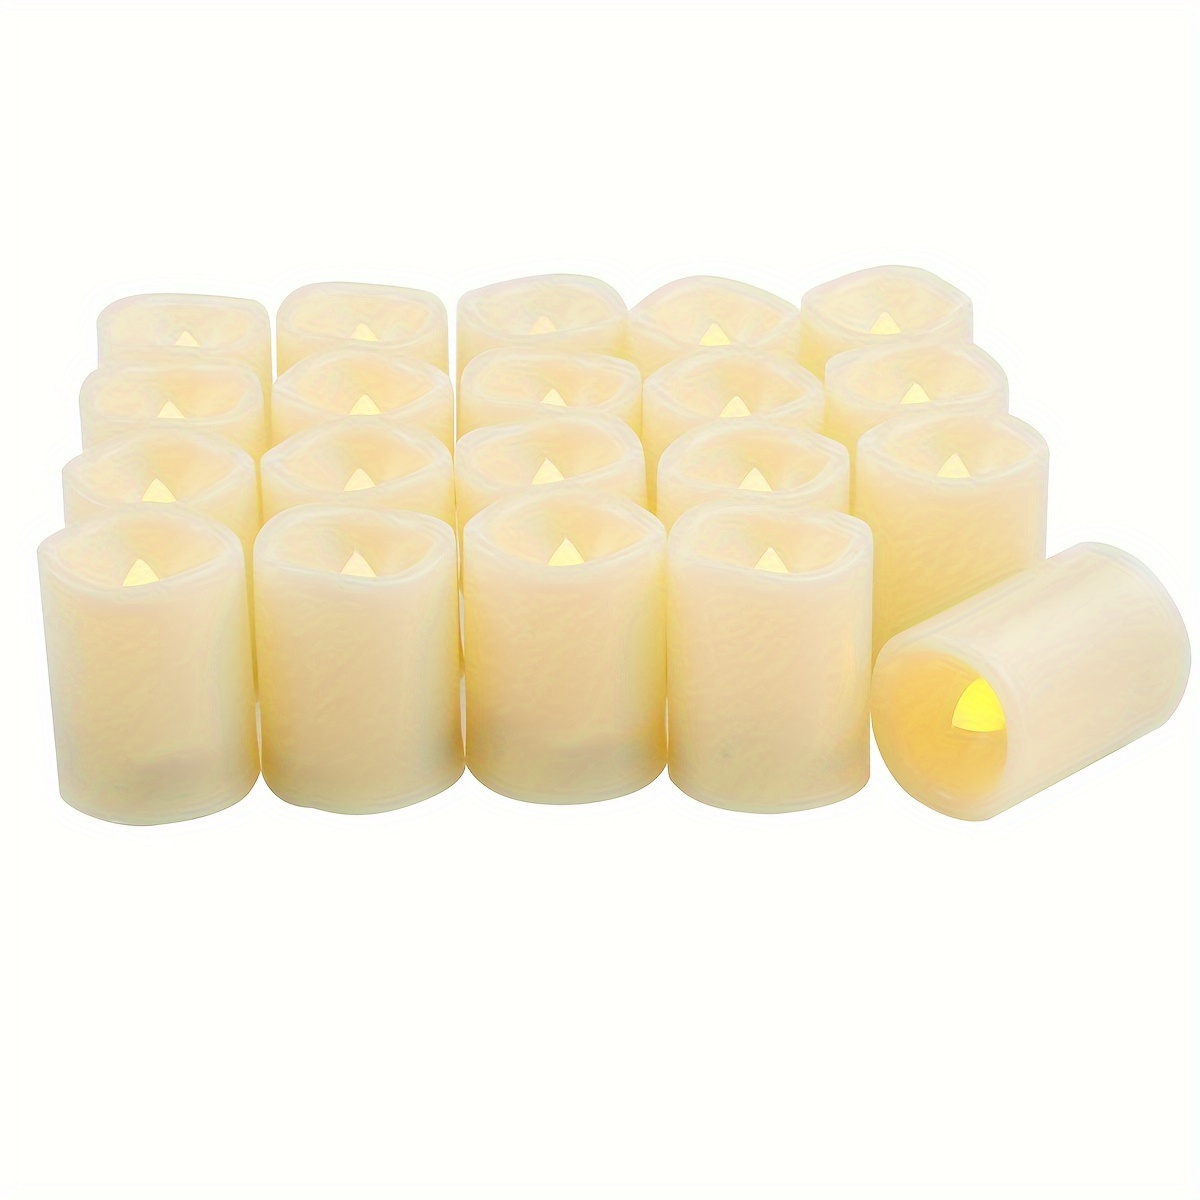 

20 Pack Battery Operated Flameless Votive Candles Led Electric Tea Lights With White Body And Amber Glow For Home Kitchen Wedding Party Festival Tabletop Decorations, Size D 1.5 Inch X H 2 Inch